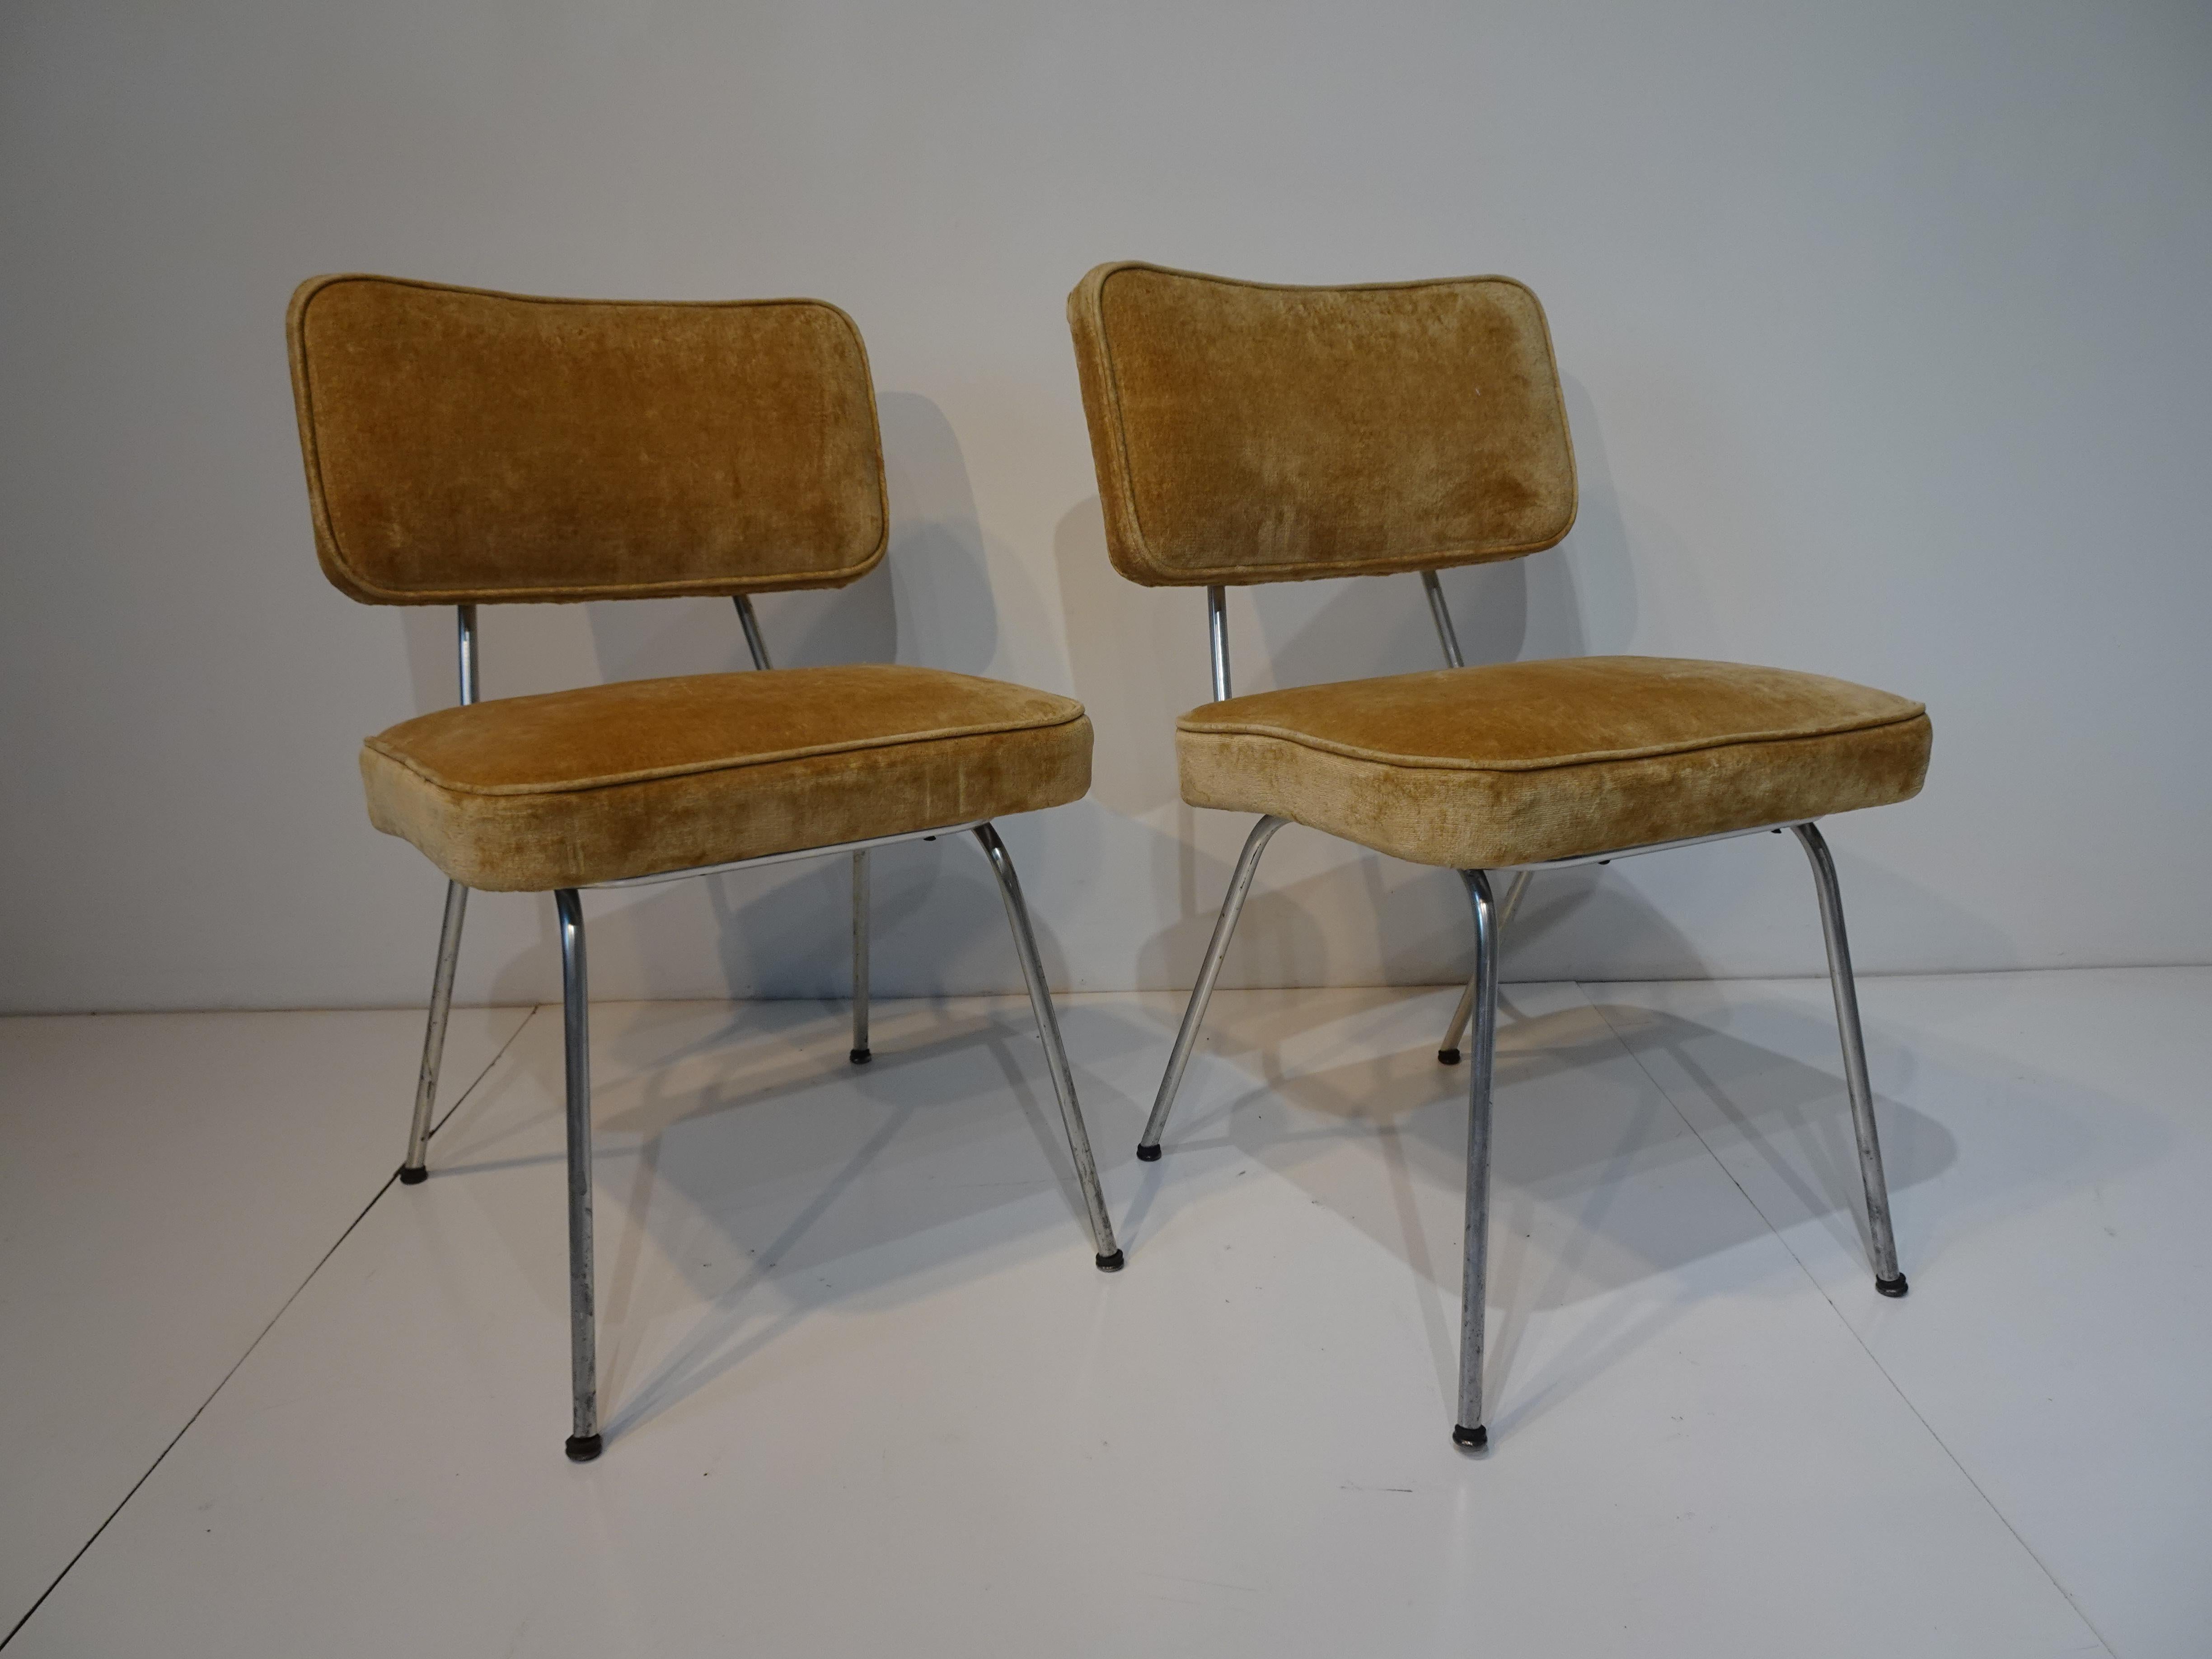 A pair of rare and early production upholstered George Nelson chairs with sculptural satin aluminum tube frames and screw in foot pads . Manufactured by the Herman Miller Furniture company as pictured in their 1955 factory catalog as model number